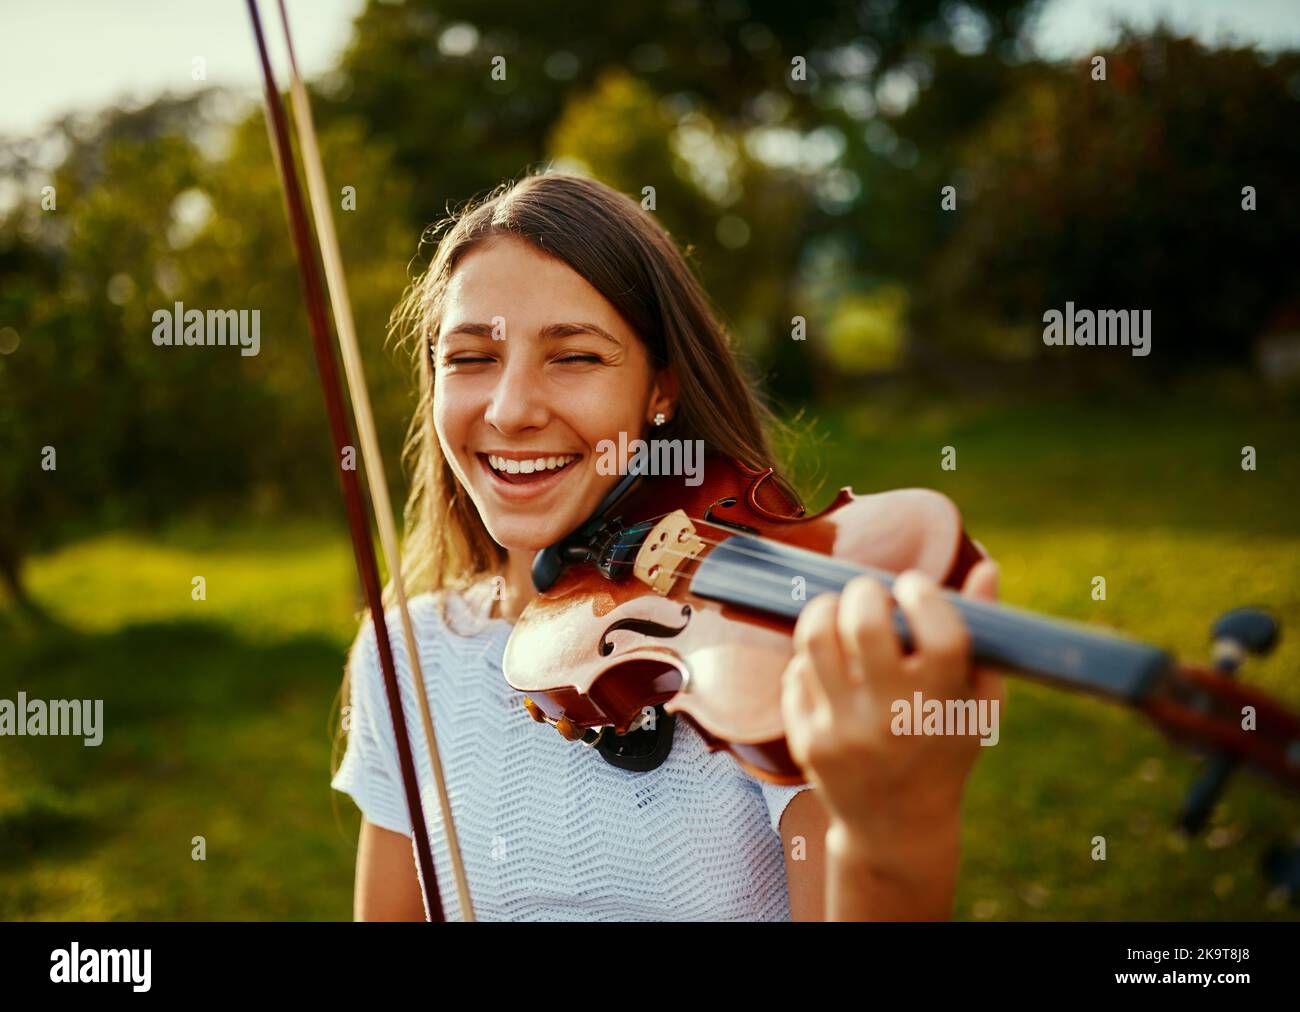 Playing with nature all around always makes her happy. a young girl playing a violin outdoors. Stock Photo